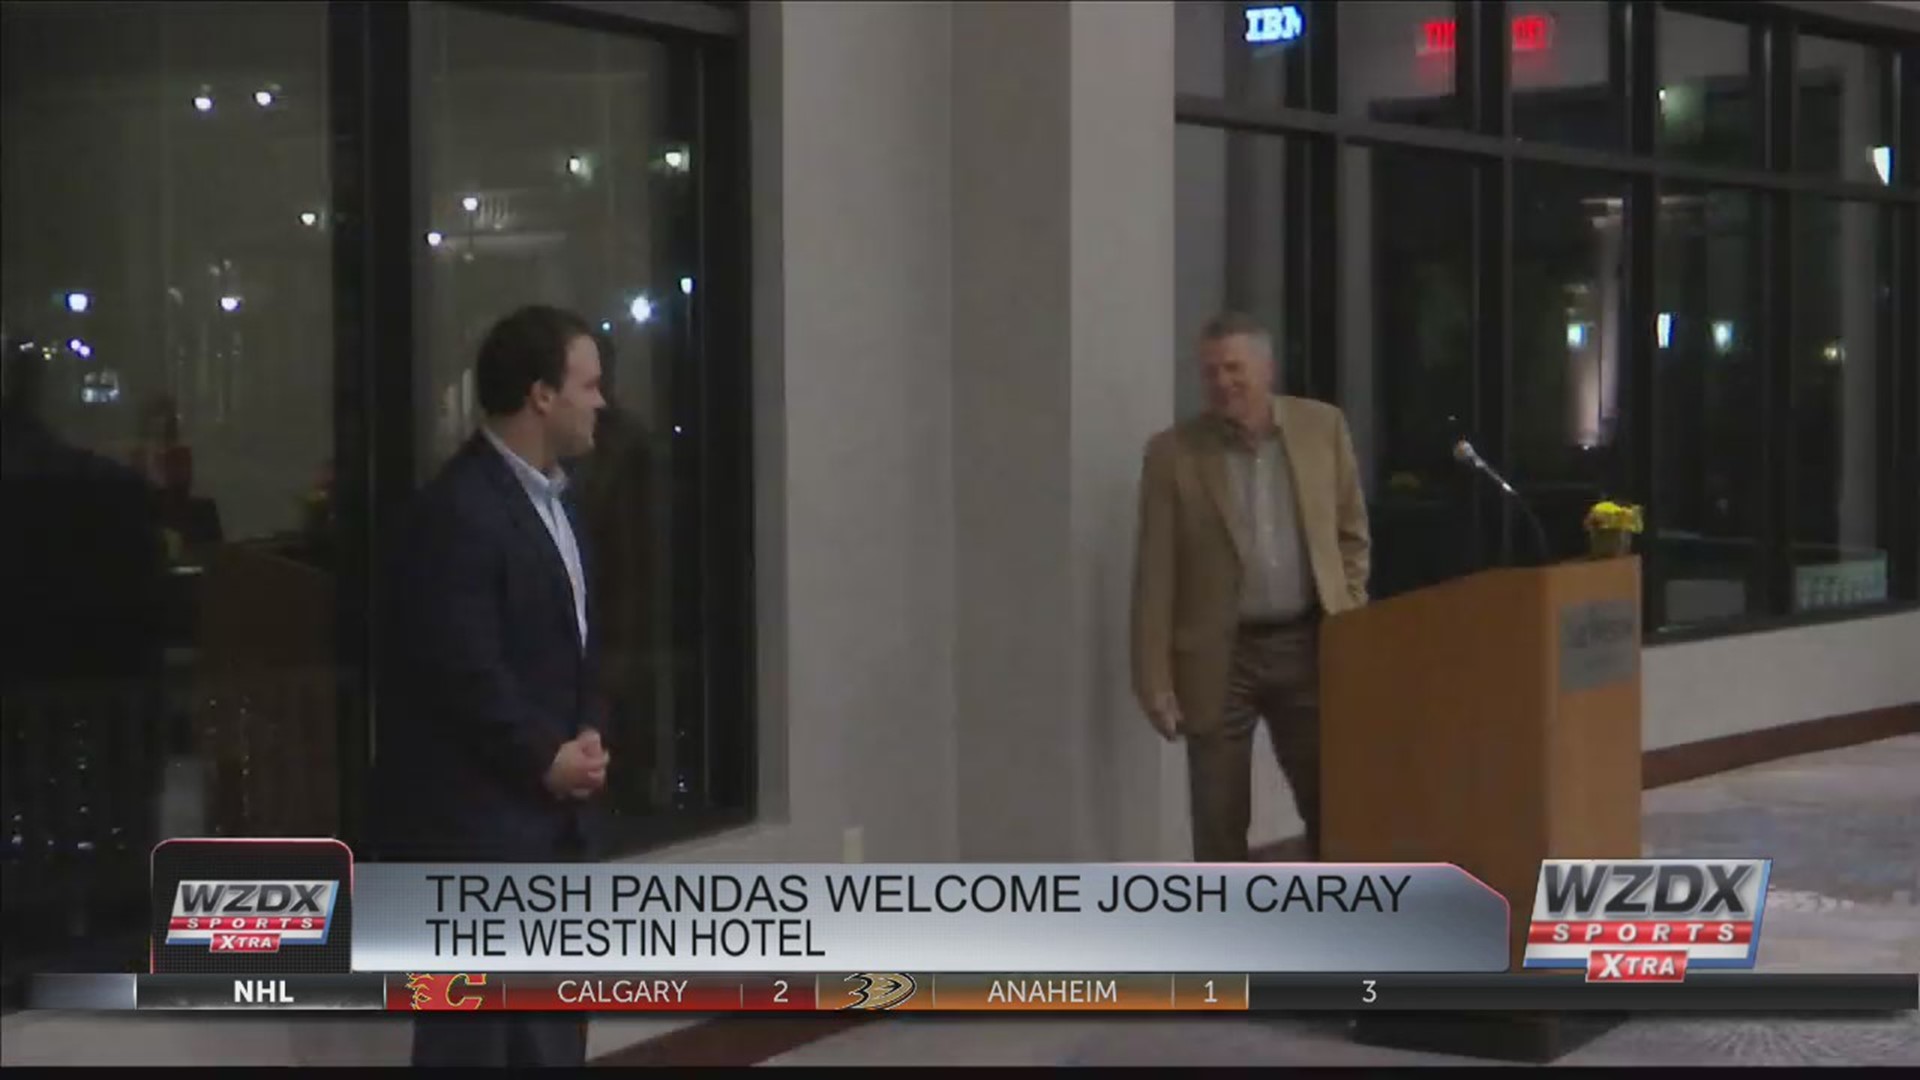 The Rocket City Trash Pandas and members of the local community gathered at The Westin Thursday to welcome Josh Caray to the city. Caray is the first voice of the organization.